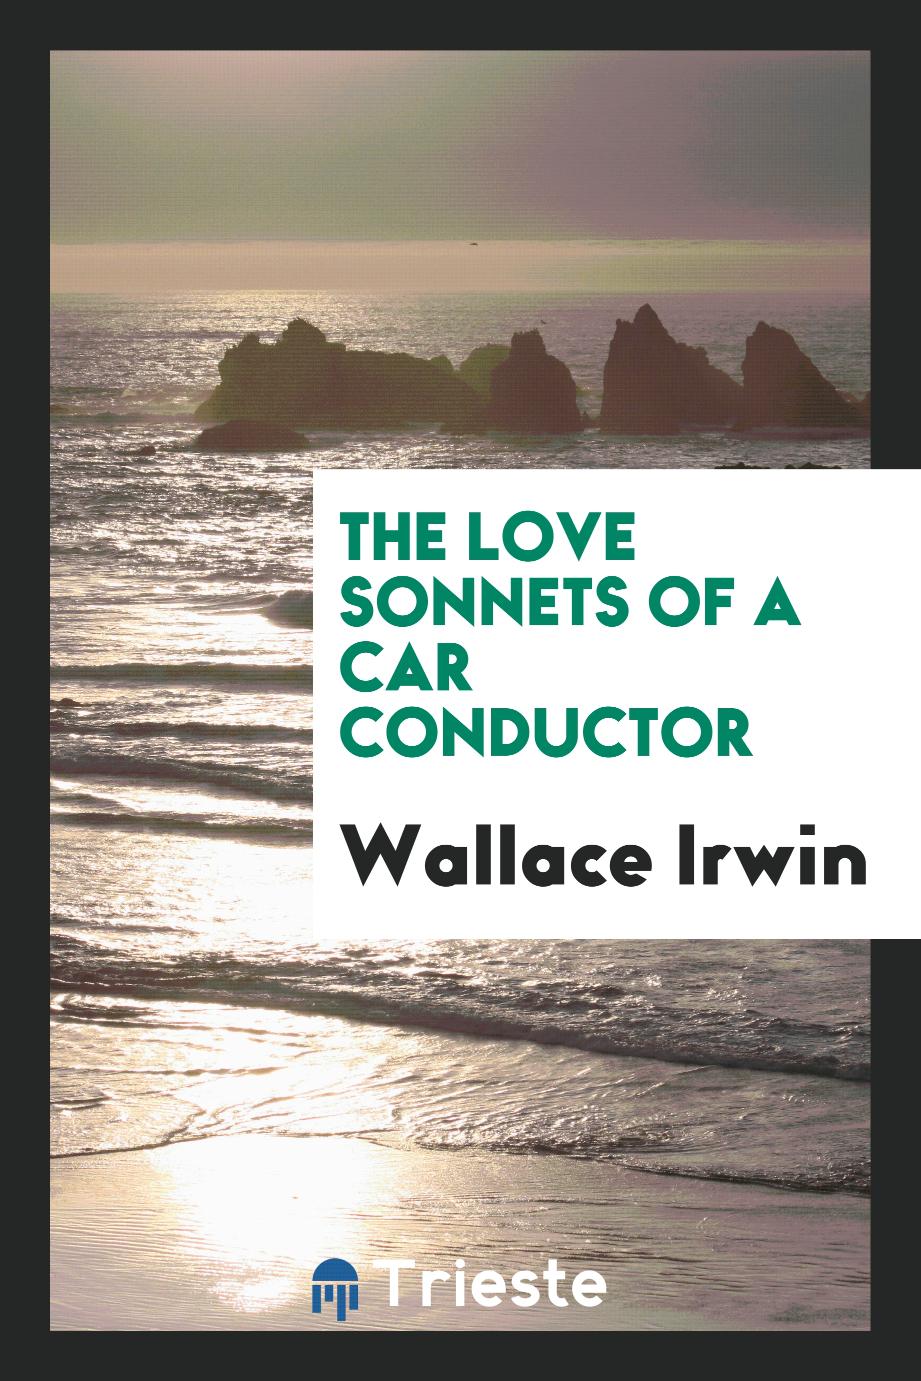 The love sonnets of a car conductor